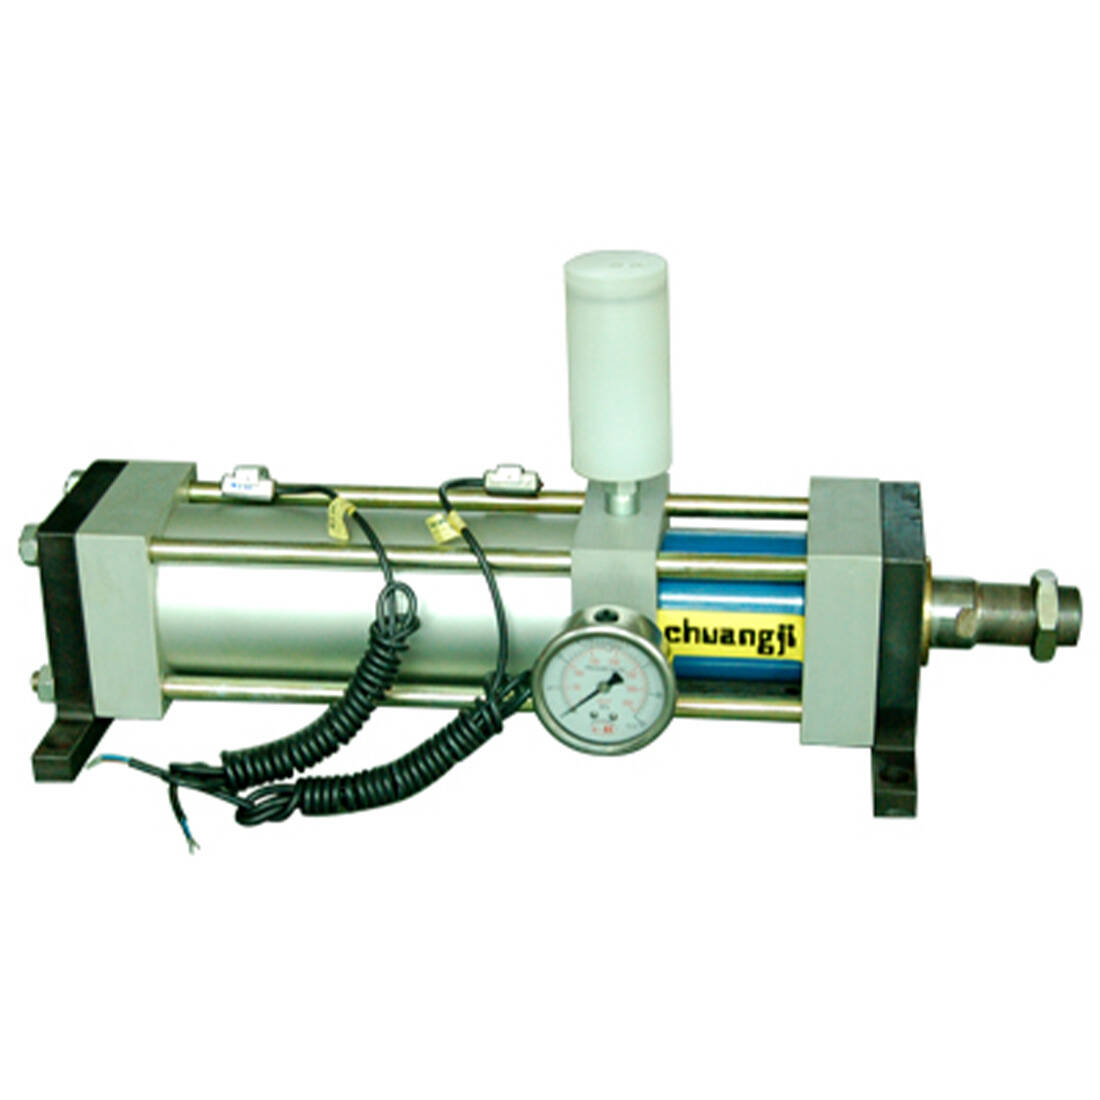 MPTC-1T Direct Pressure Booster Cylinder